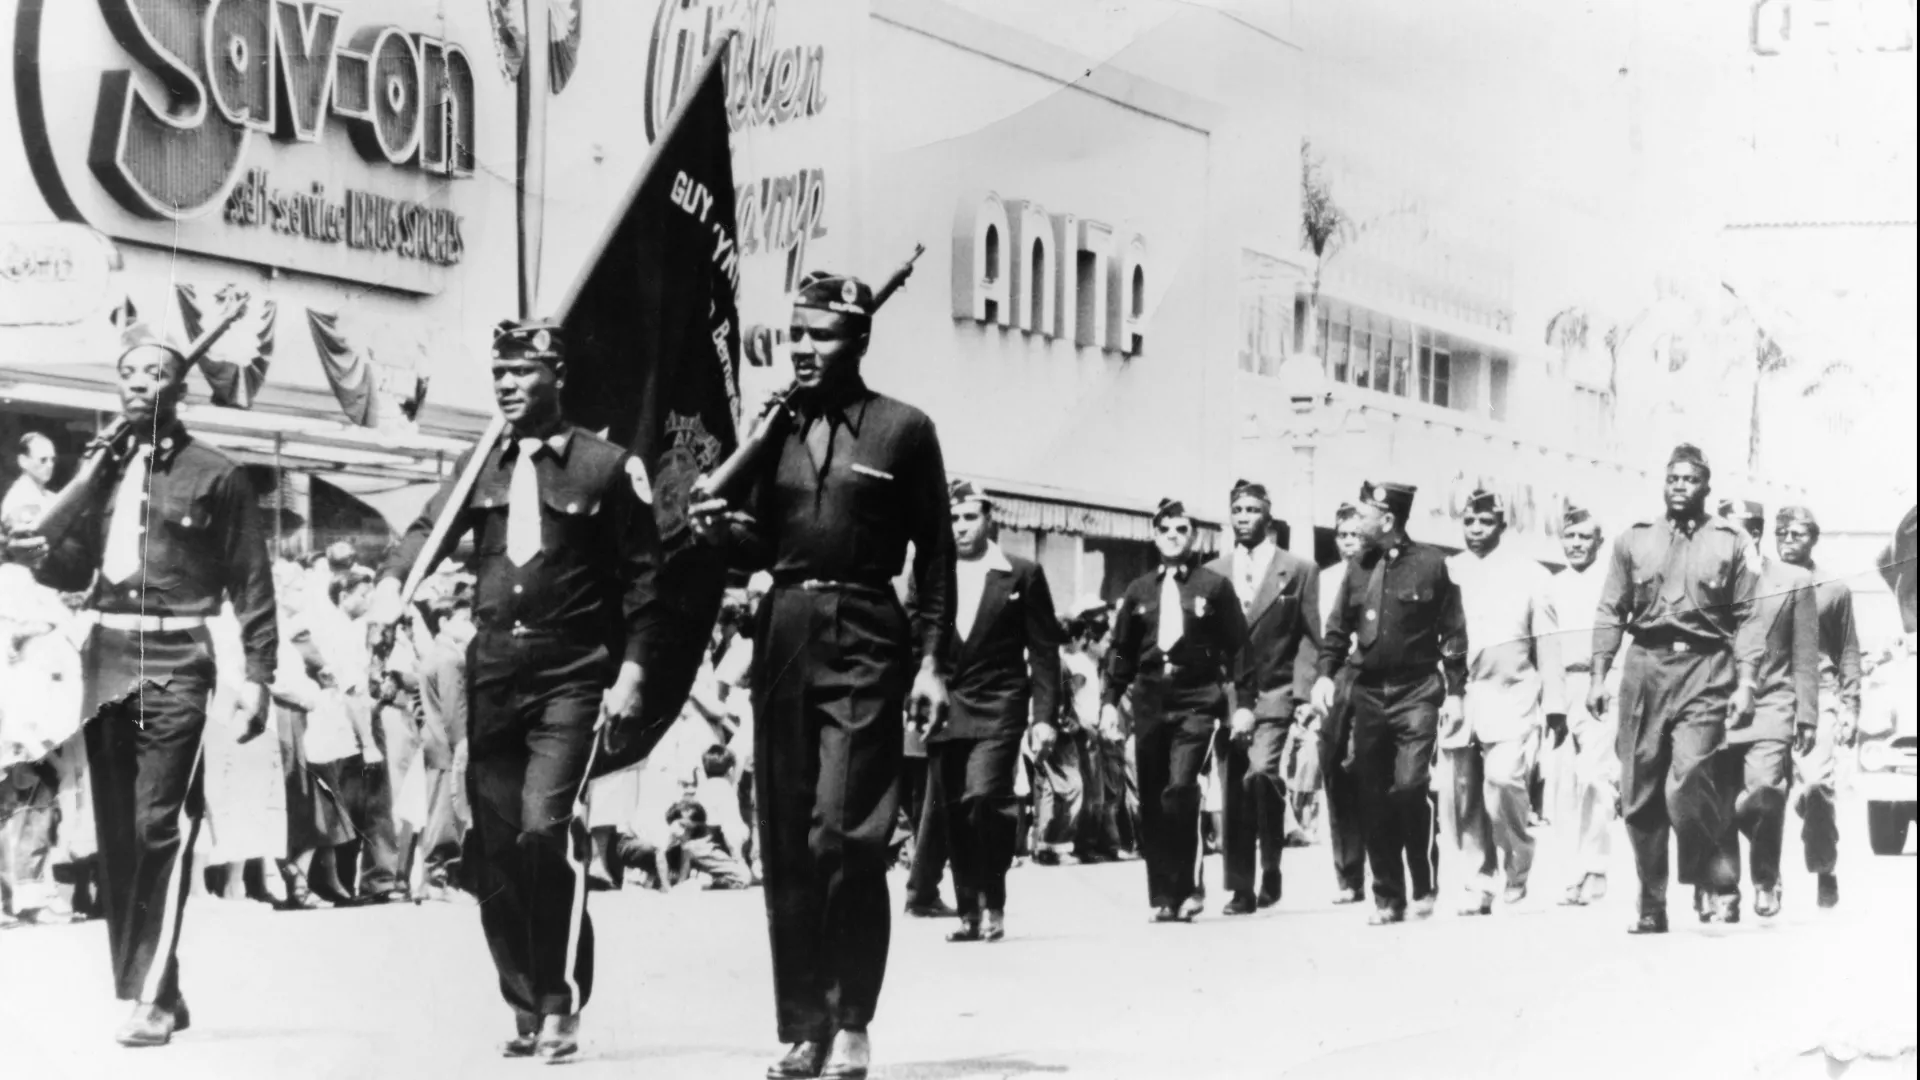 Black history in the IE seeks community contributions